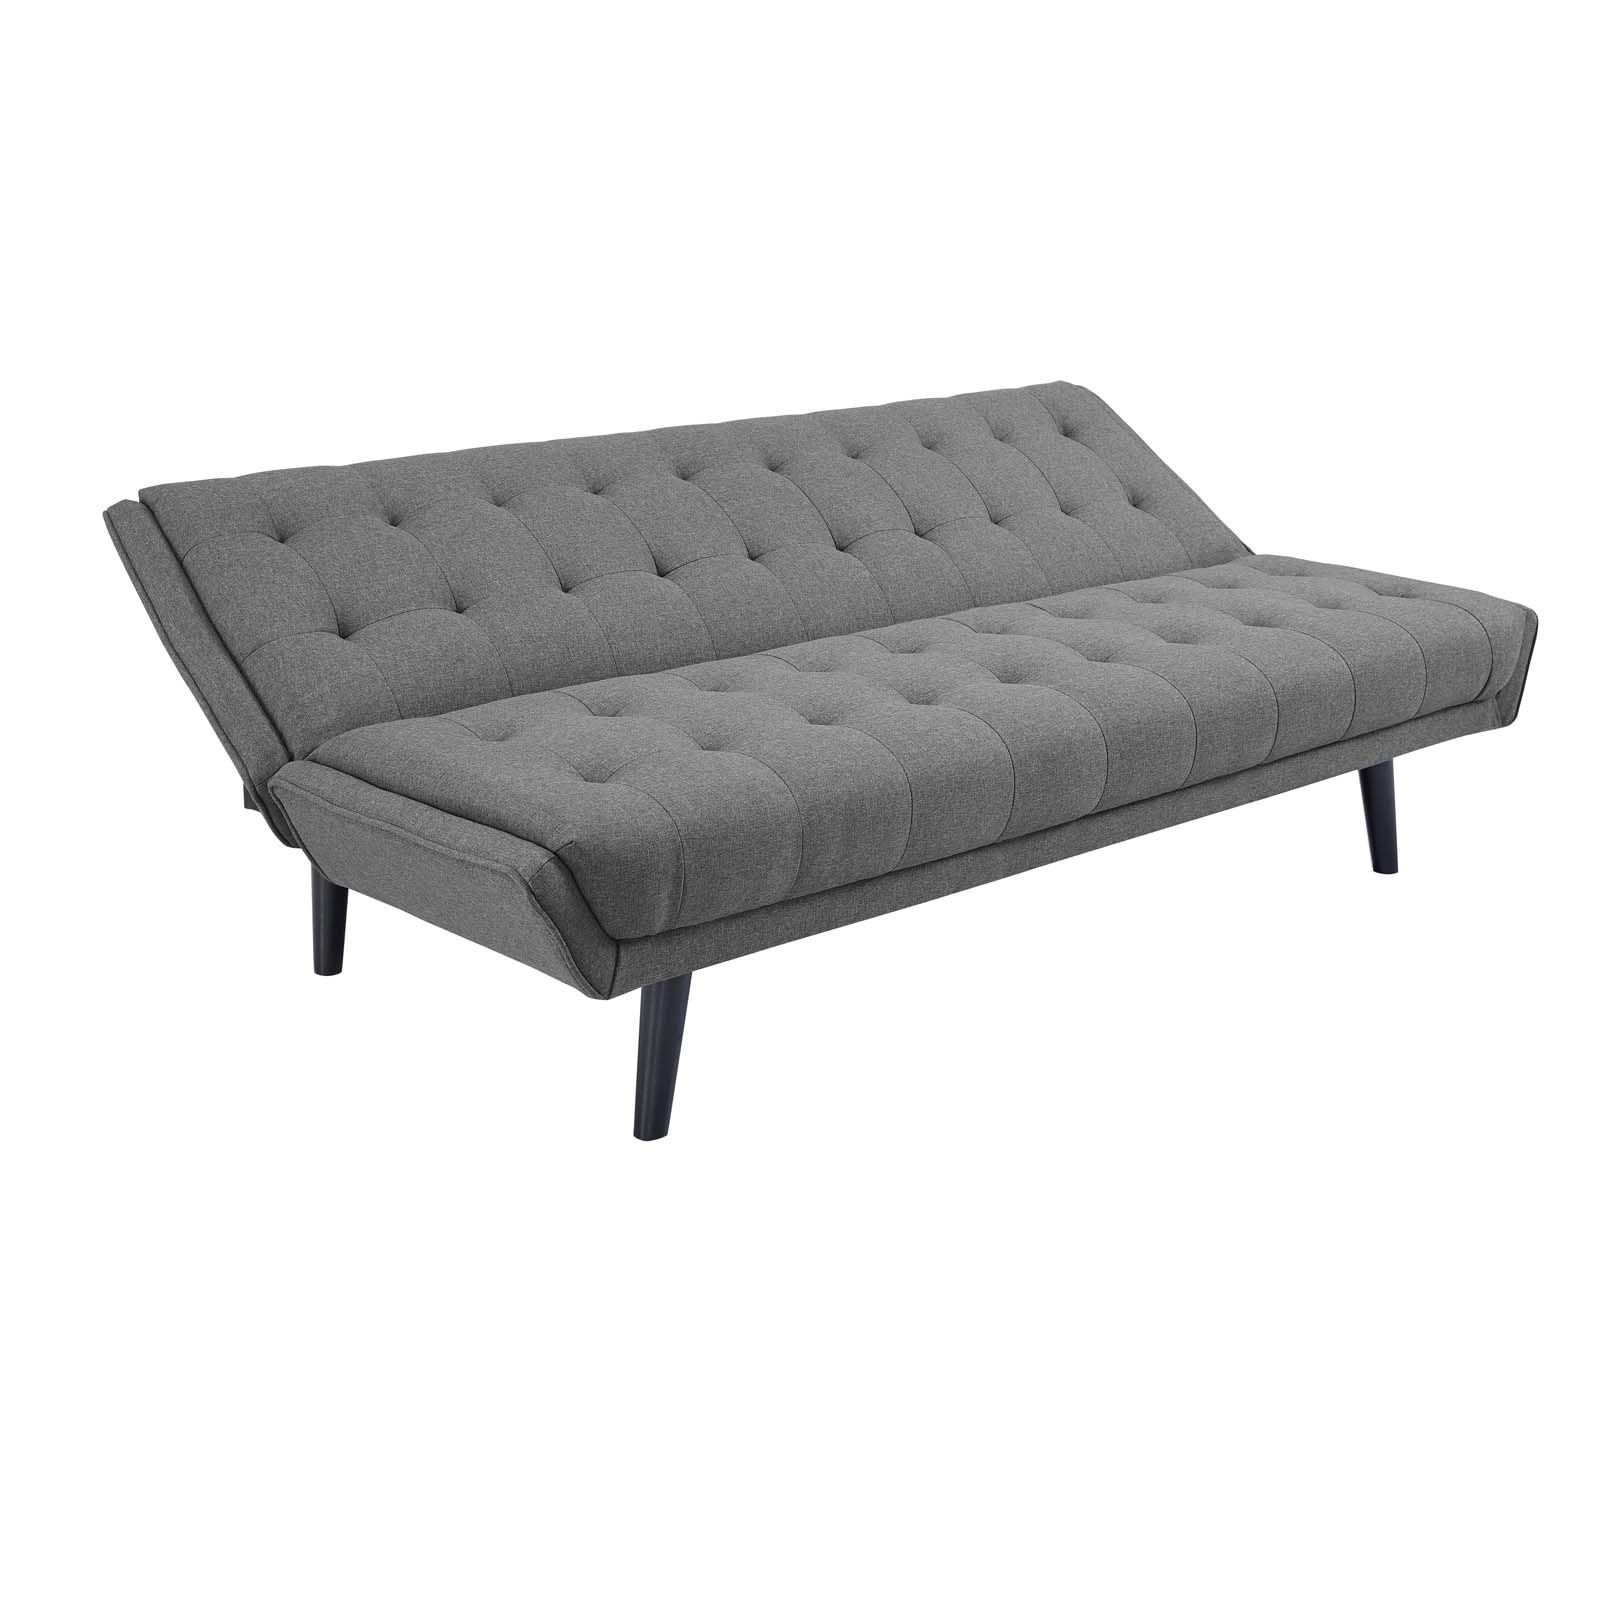 Glance Tufted Convertible Fabric Sofa Bed Gray In Tufted Convertible Sleeper Sofas (Gallery 8 of 20)